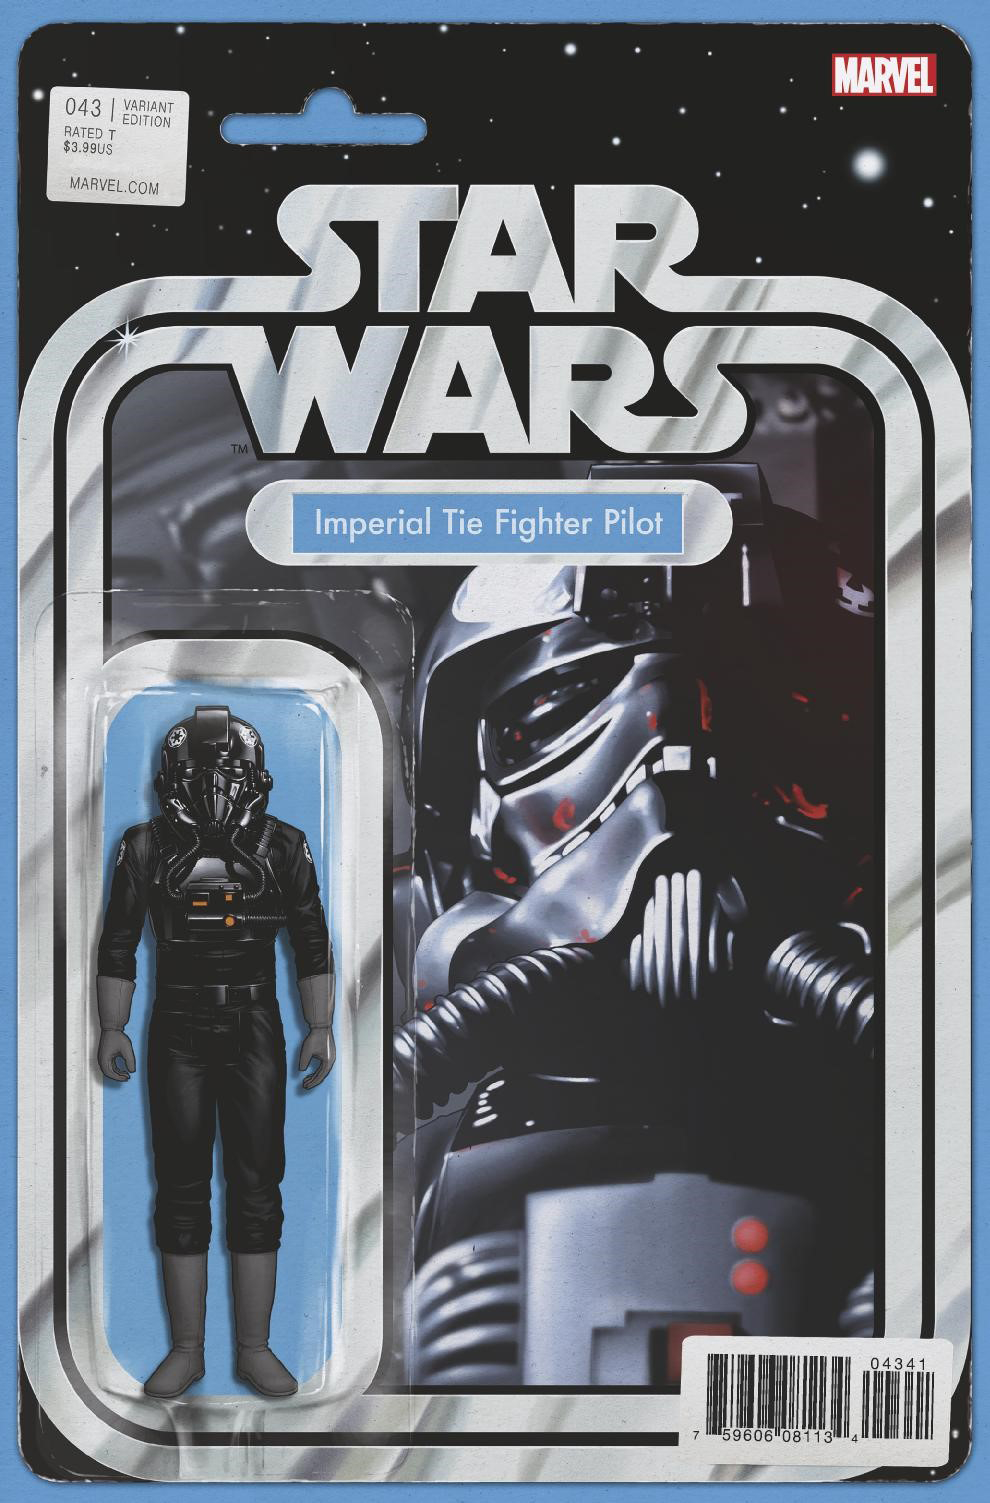 Star Wars #43 (Action Figure Variant Cover) (07.02.2018)